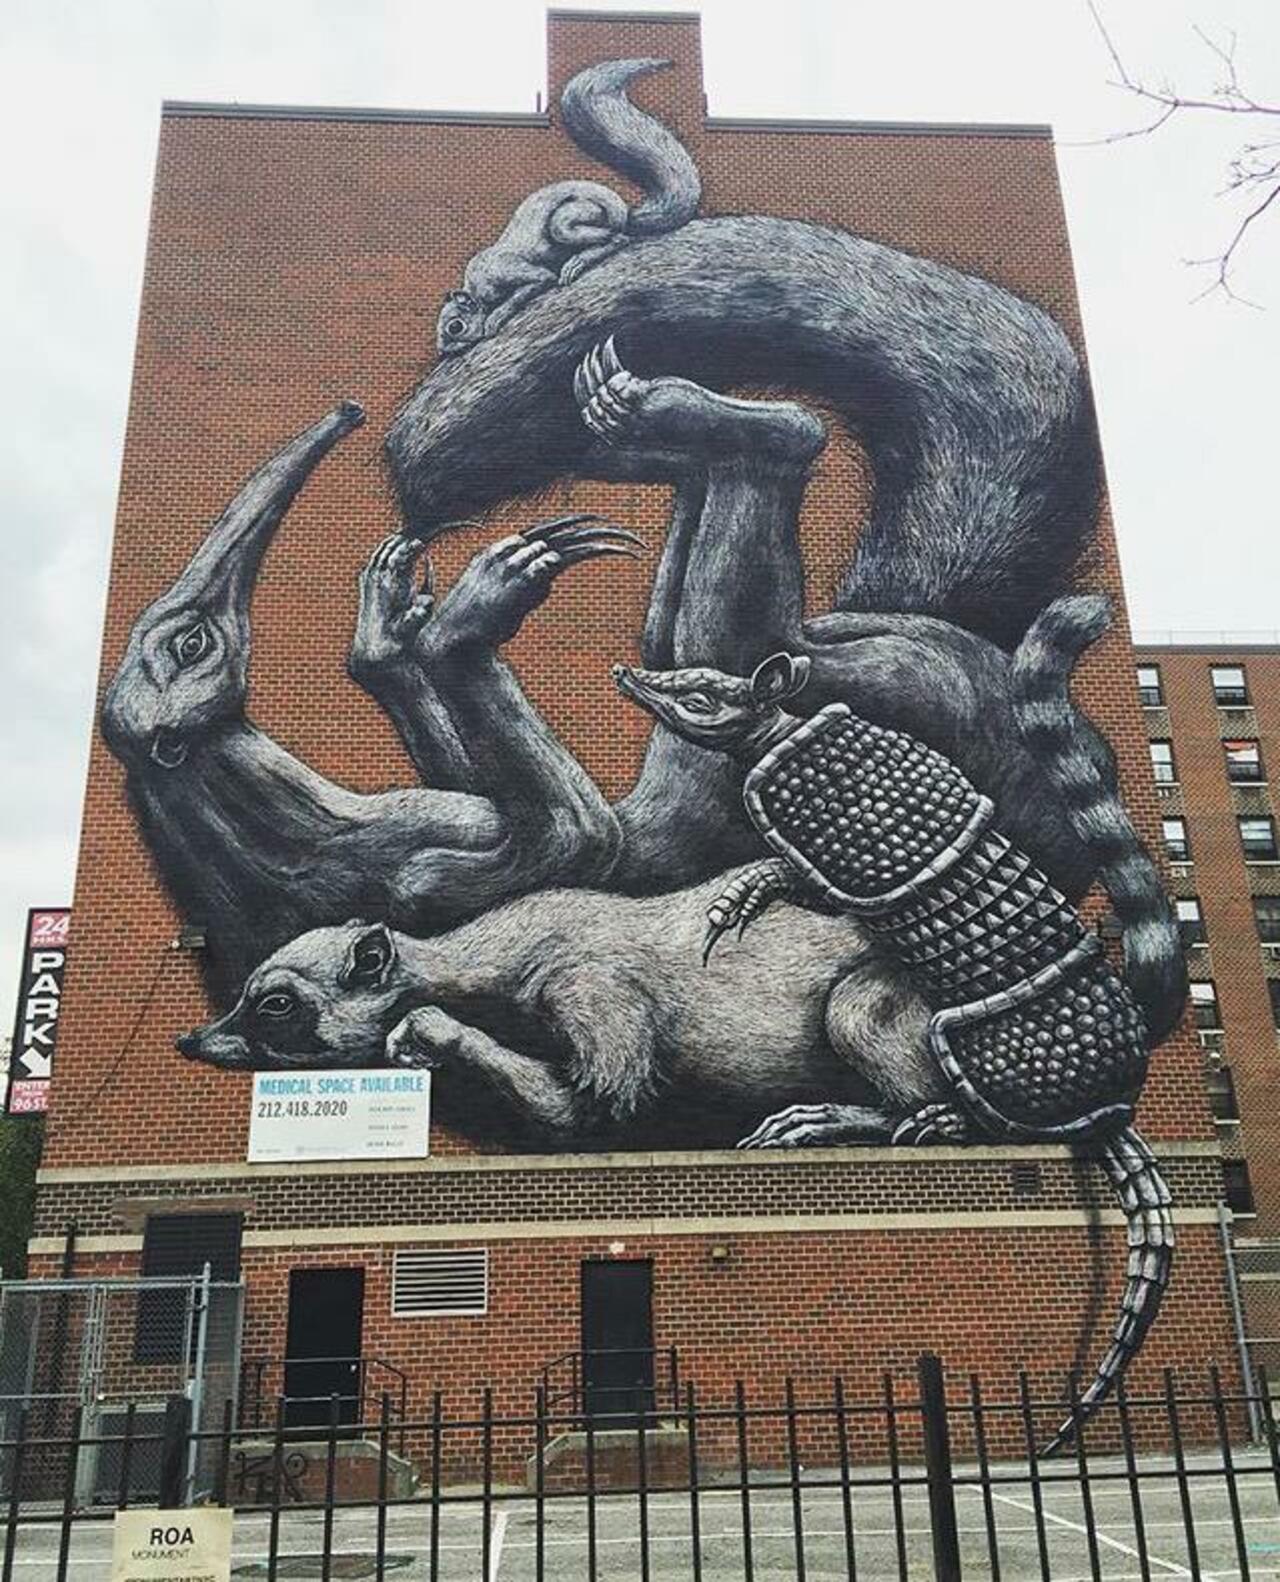 The completed new large scale Street Art wall by ROA in NYC

#art #graffiti #mural #streetart http://t.co/knErgIBinA